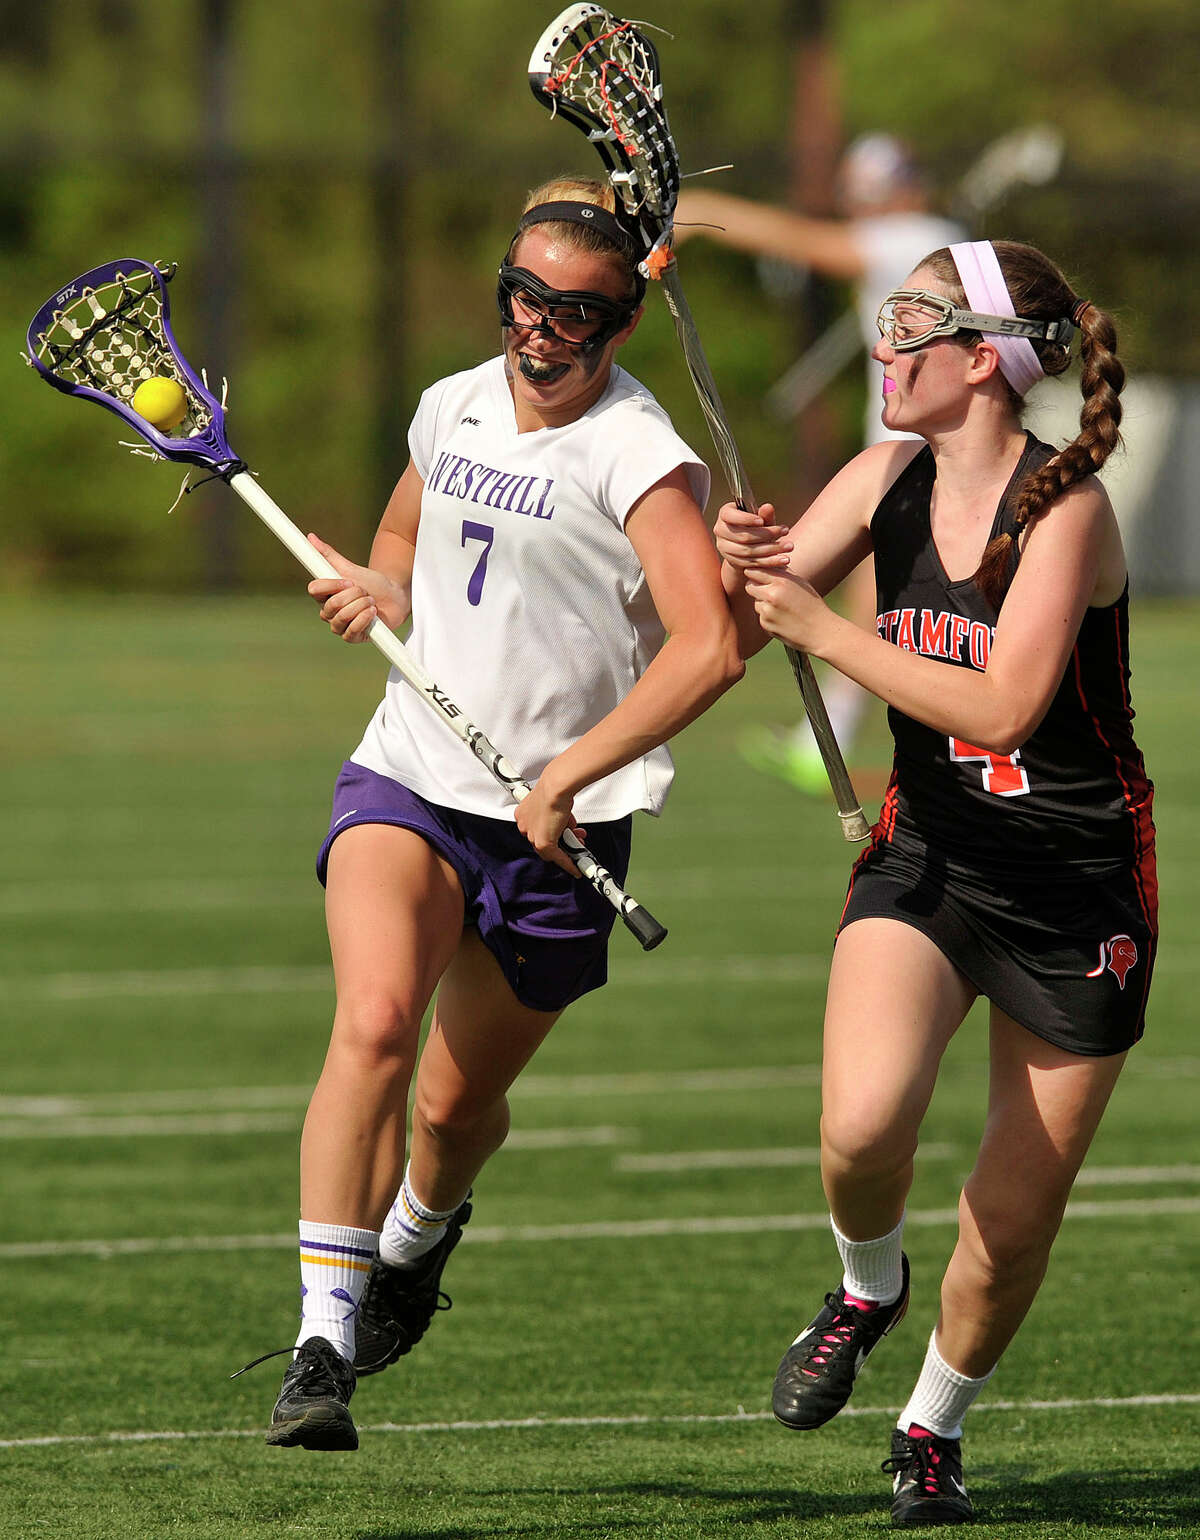 Stamford rolls over Westhill in girls lacrosse